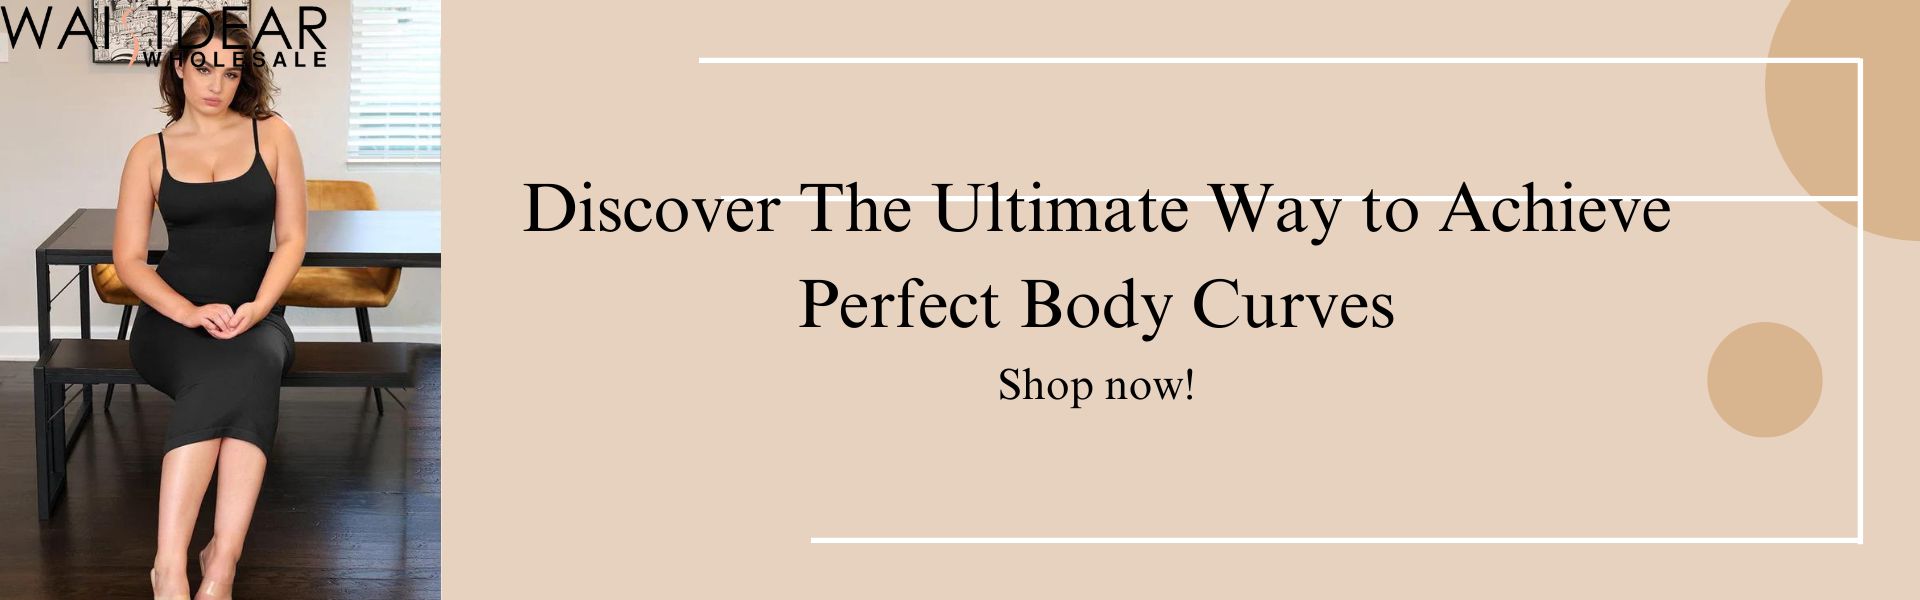 Discover The Ultimate Way to Achieve Perfect Body Curves